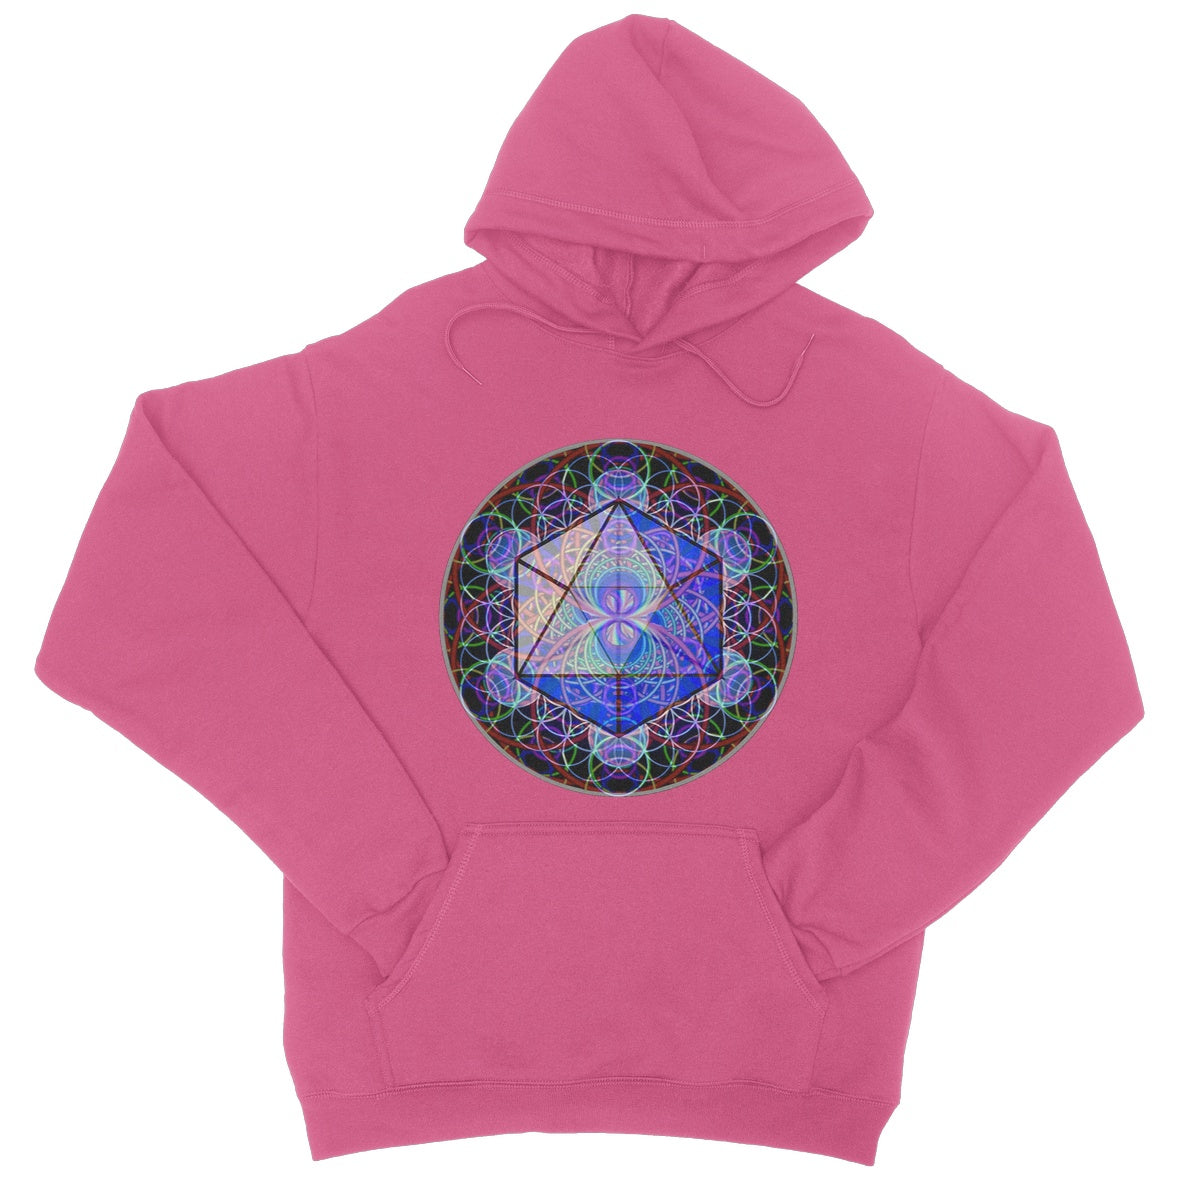 The Platonic Solid Icosahedron College Hoodie